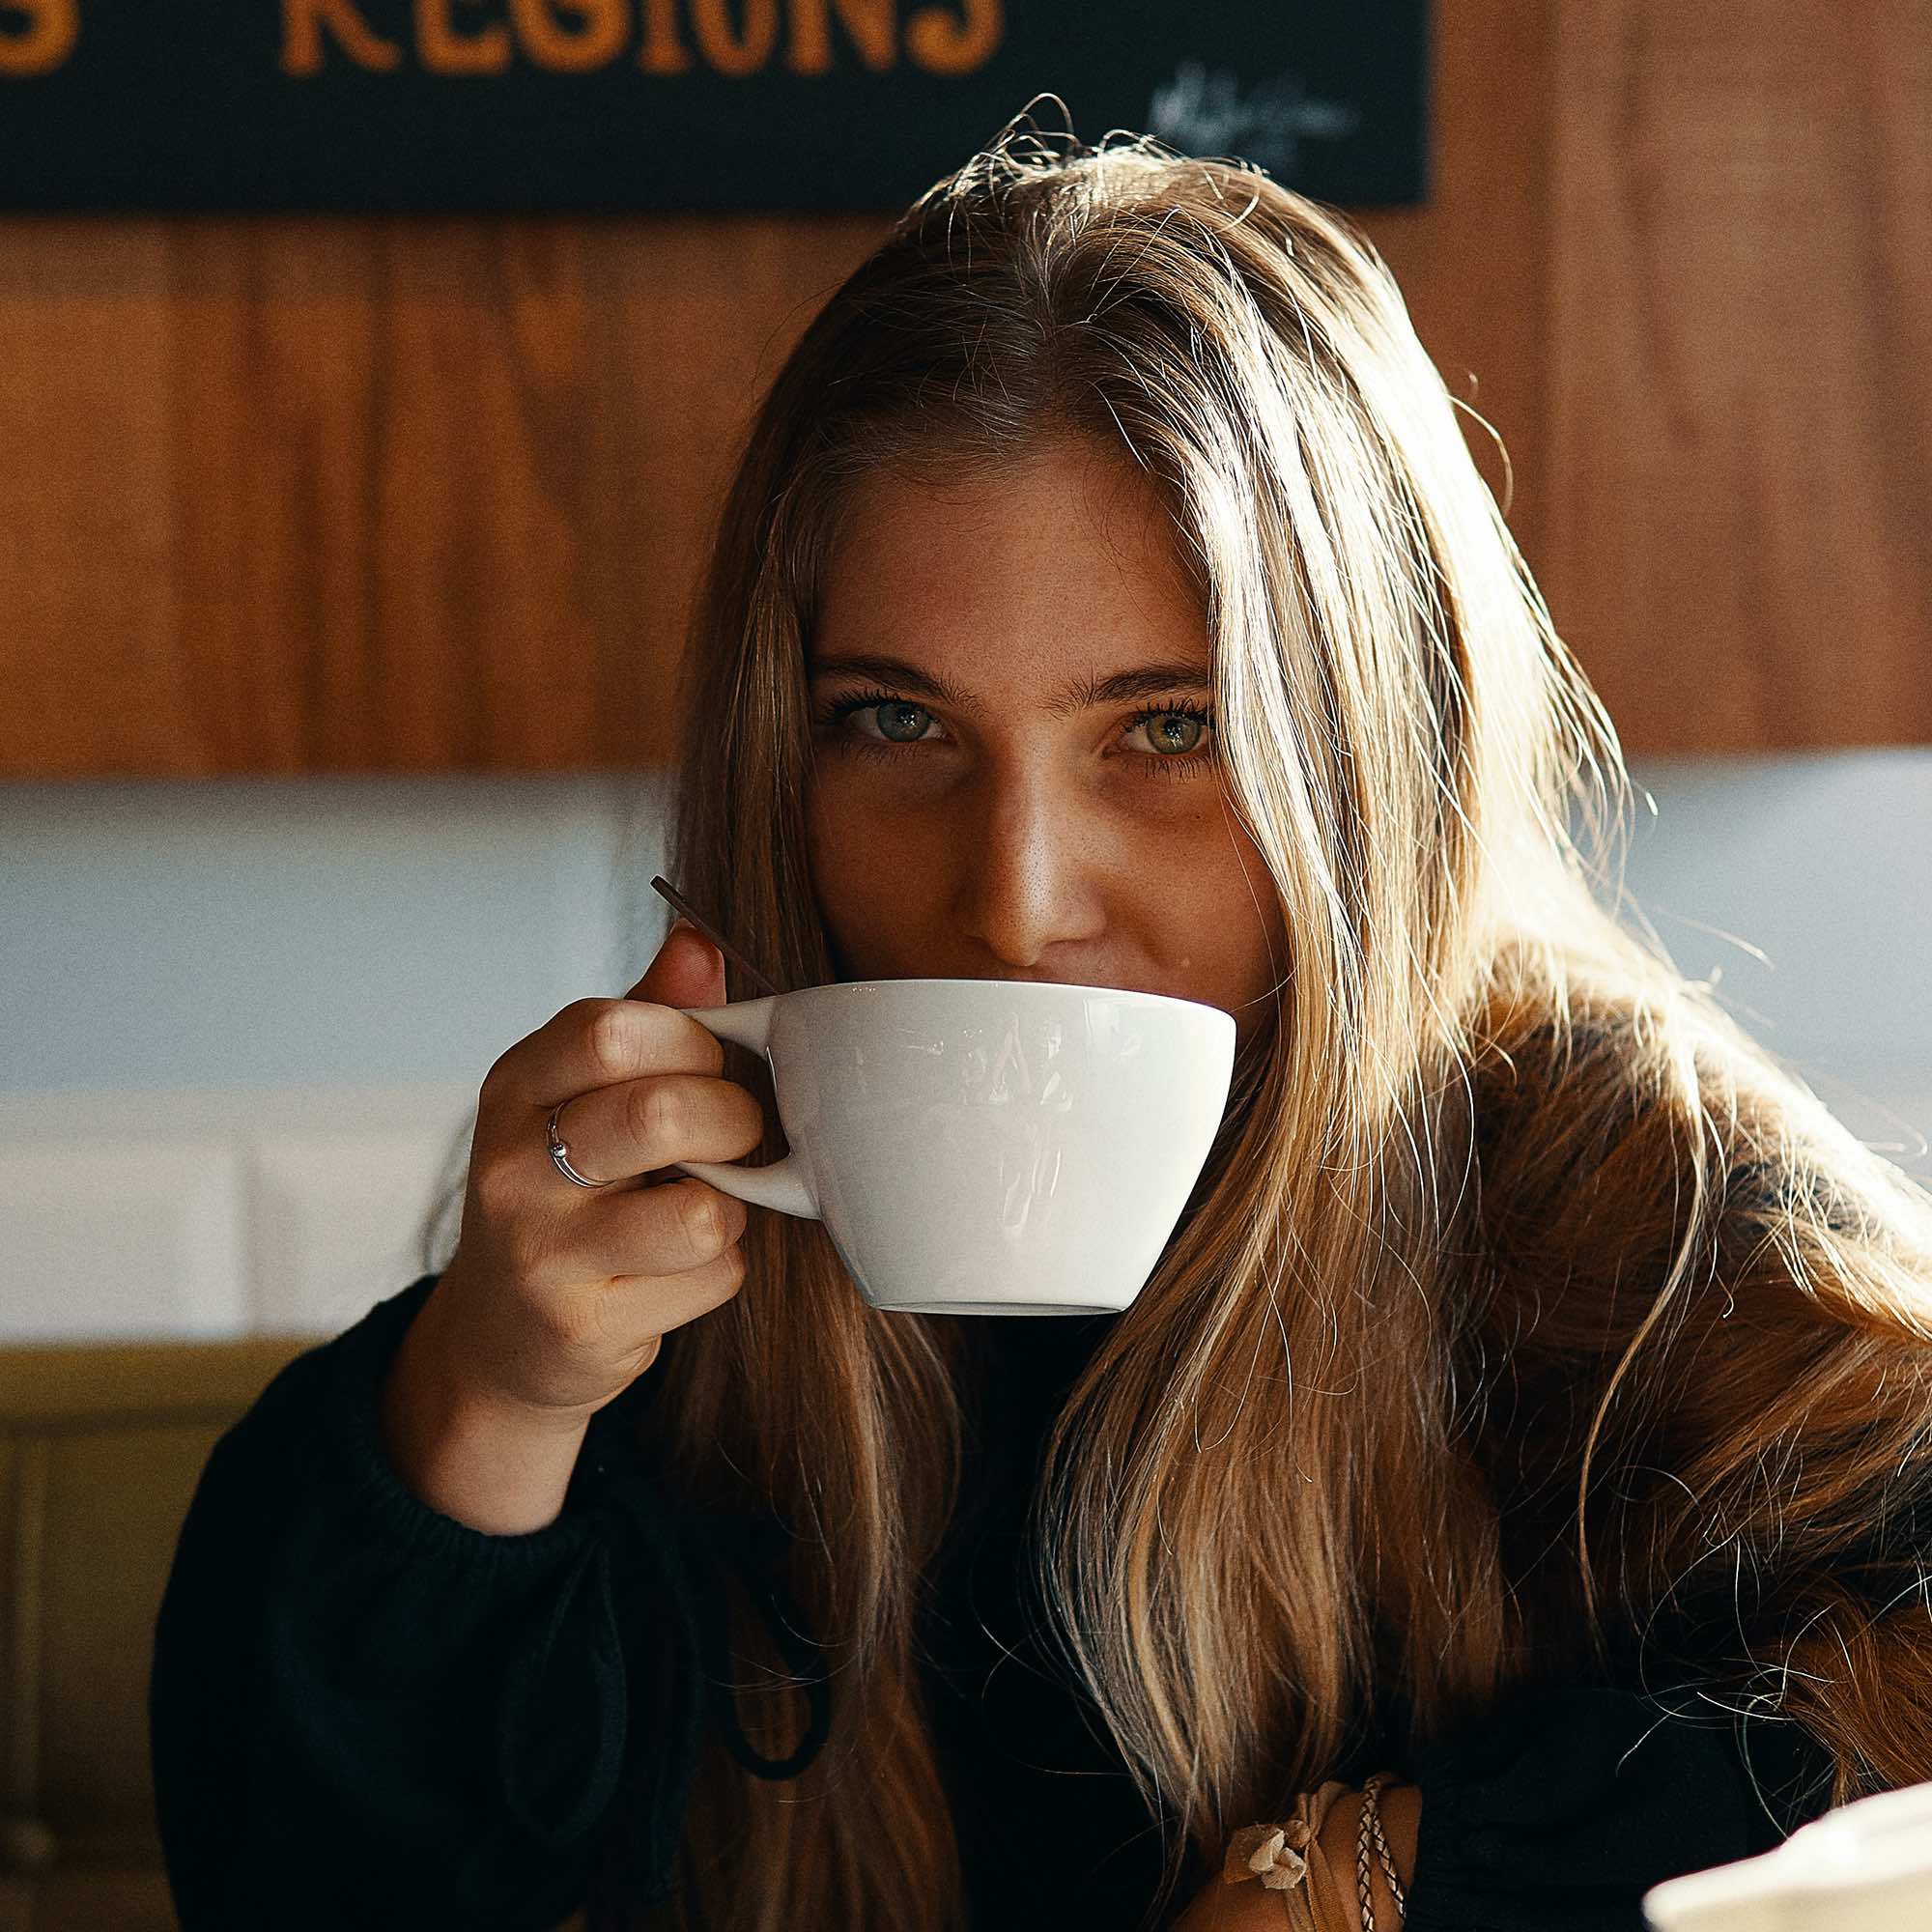 A woman sipping coffee from a white mug.